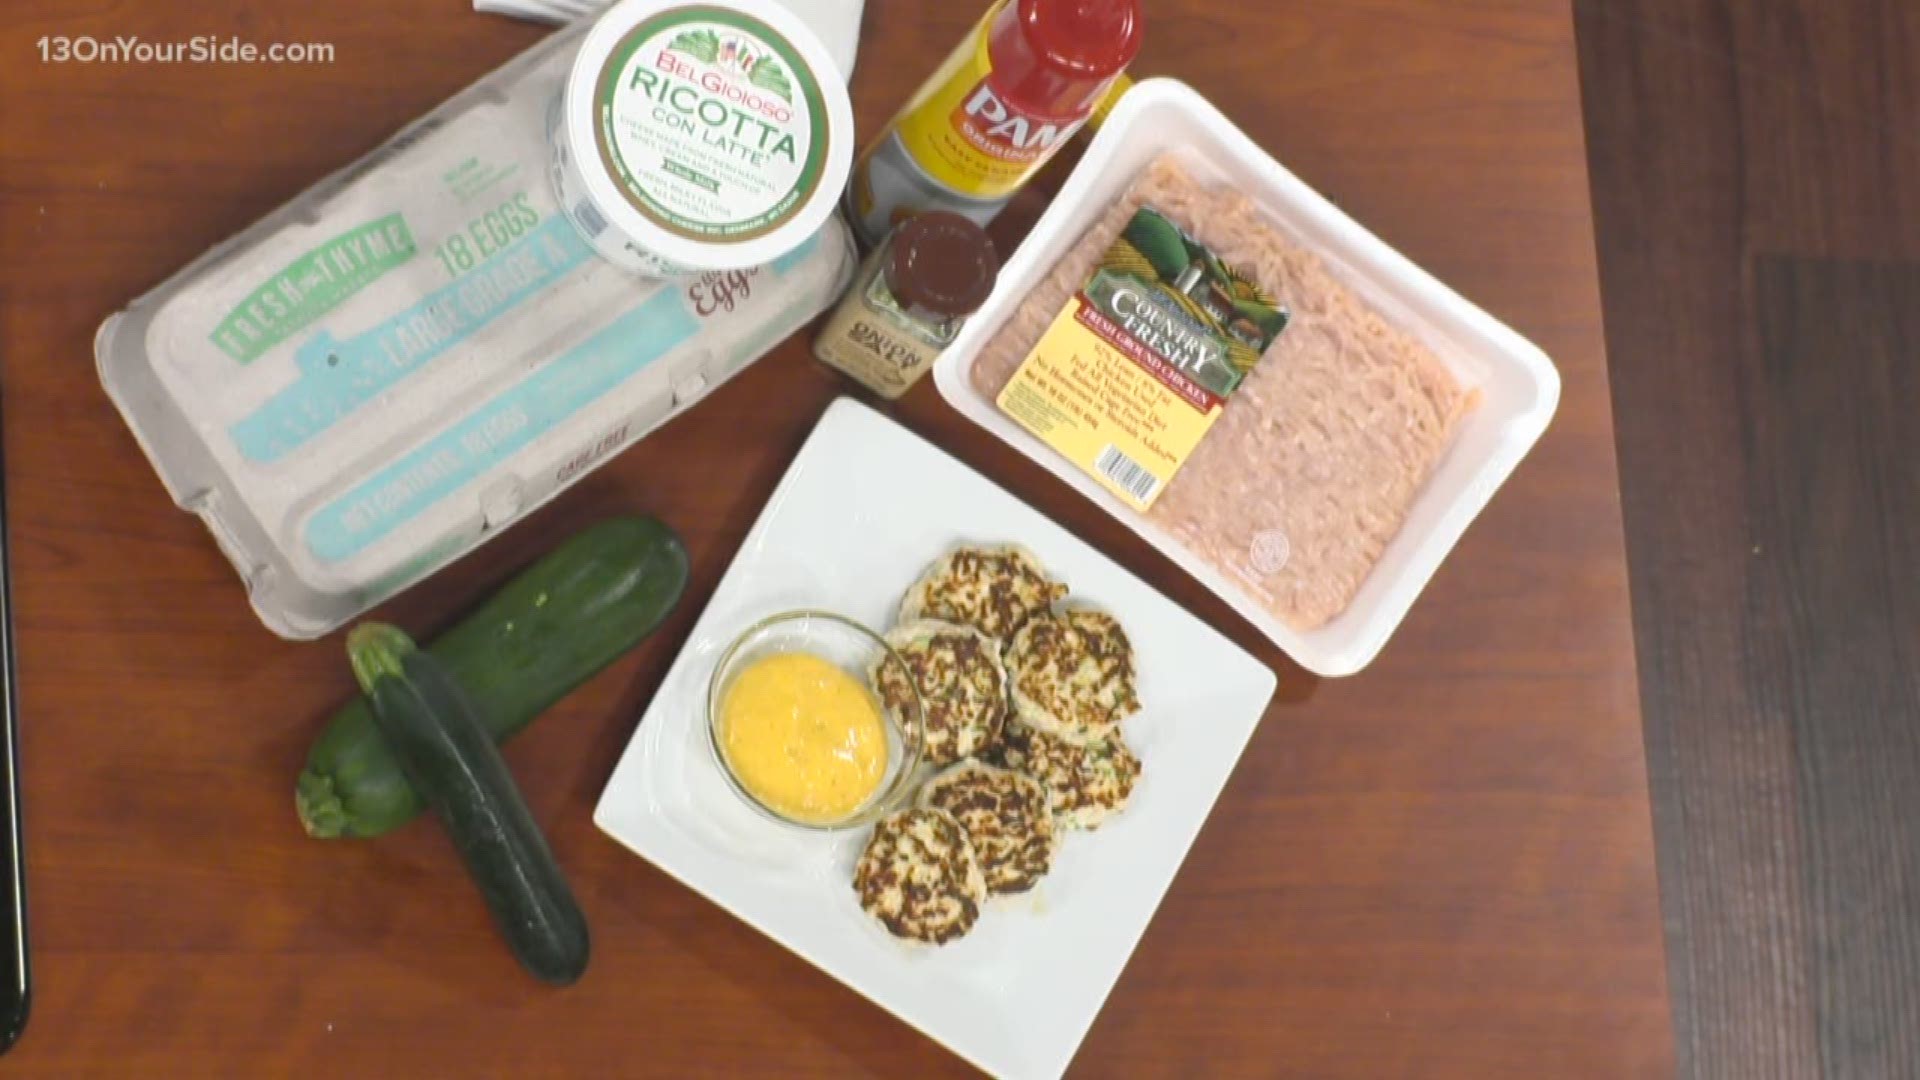 The Ginger Chef joins 13 ON YOUR SIDE at Noon to share some on-the-go snacks that are healthy and delicious.